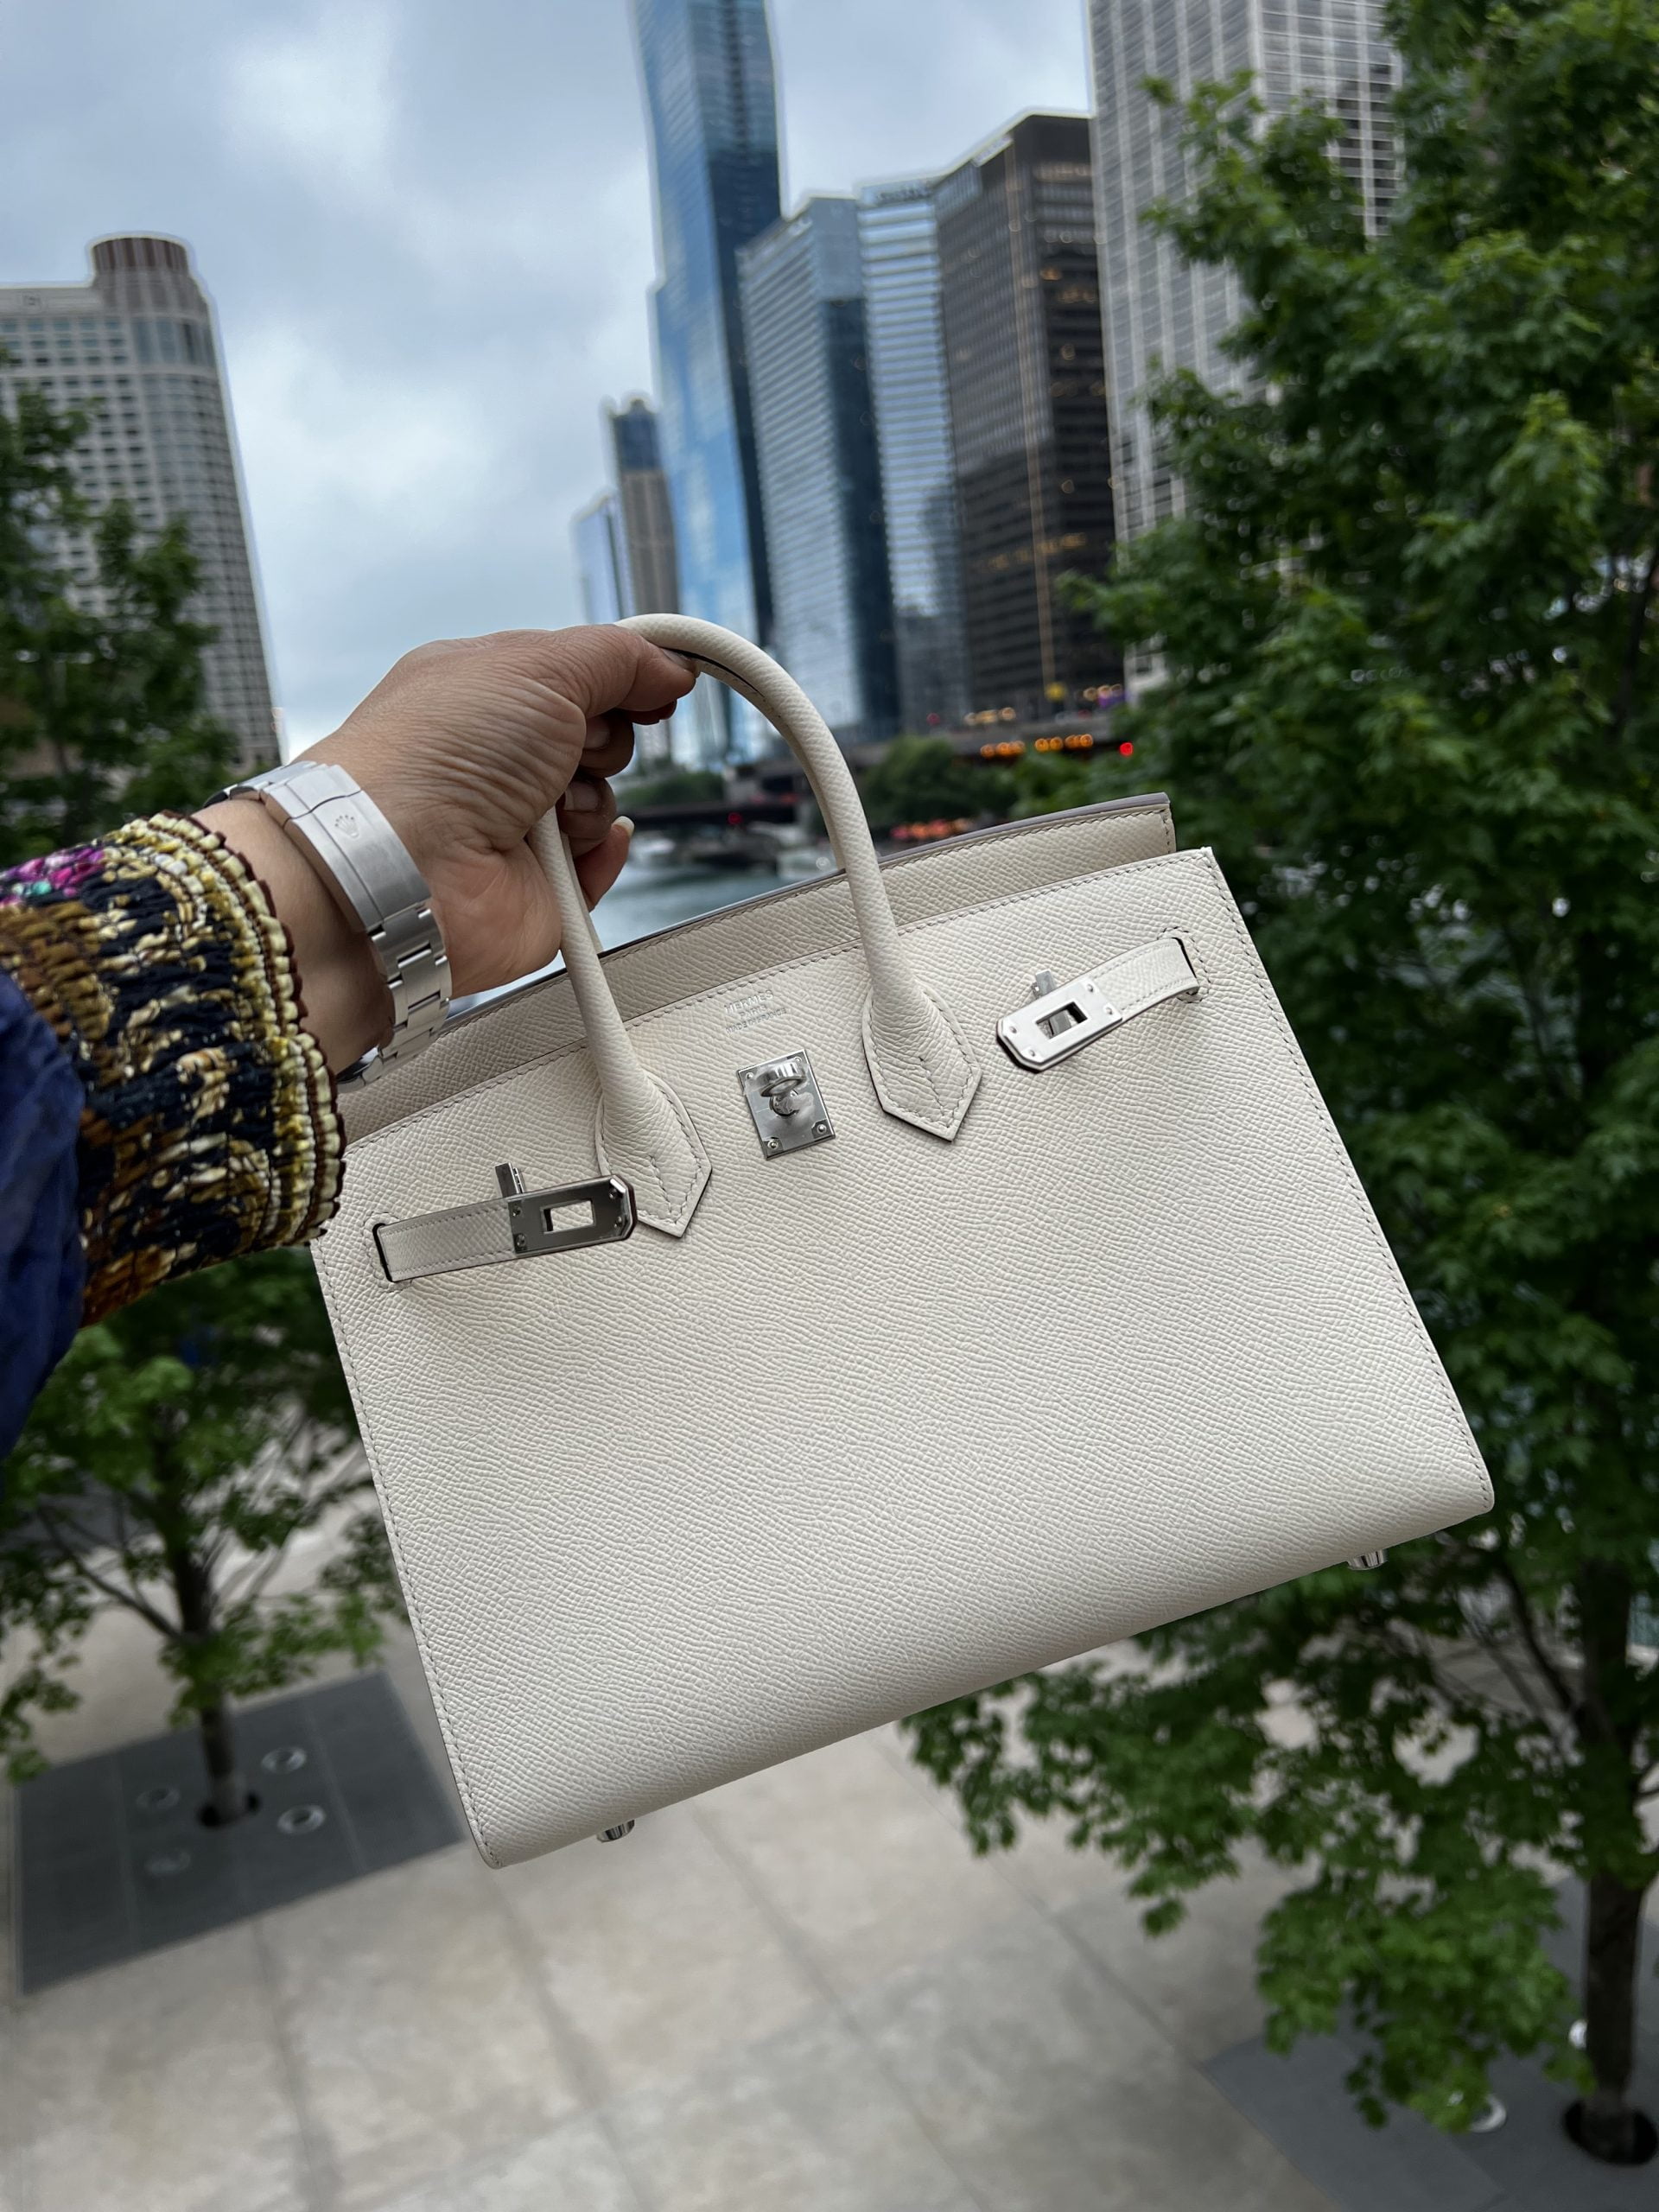 Story of a Hermes Birkin: how I got mine, and tips for bagging one - Happy  High Life